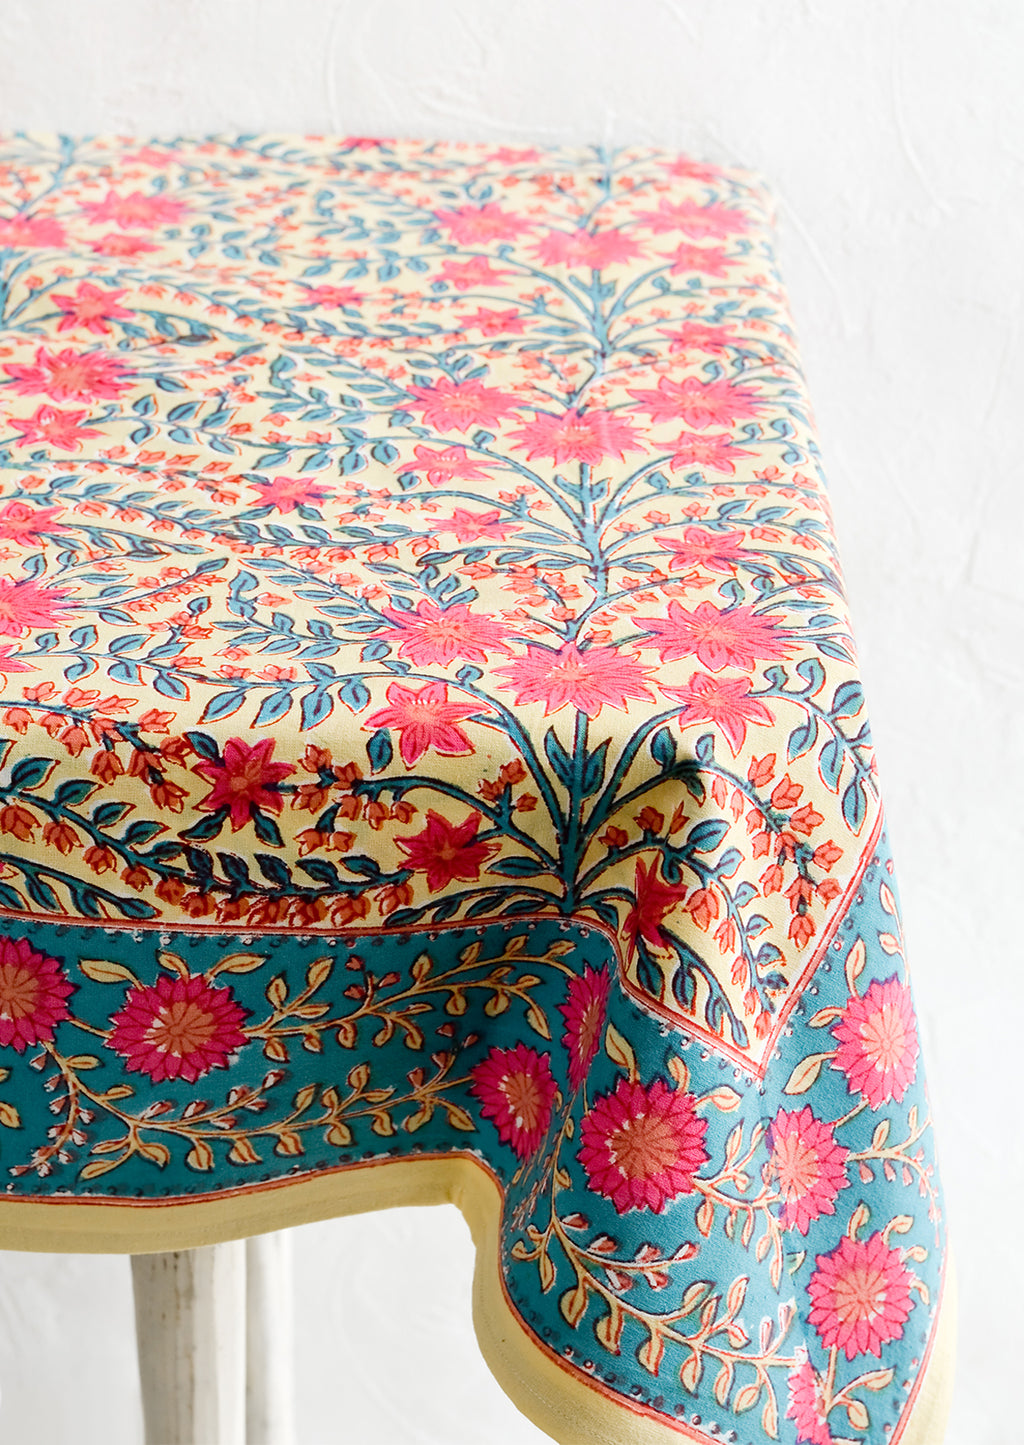 1: A vibrantly colored block printed tablecloth with floral print.